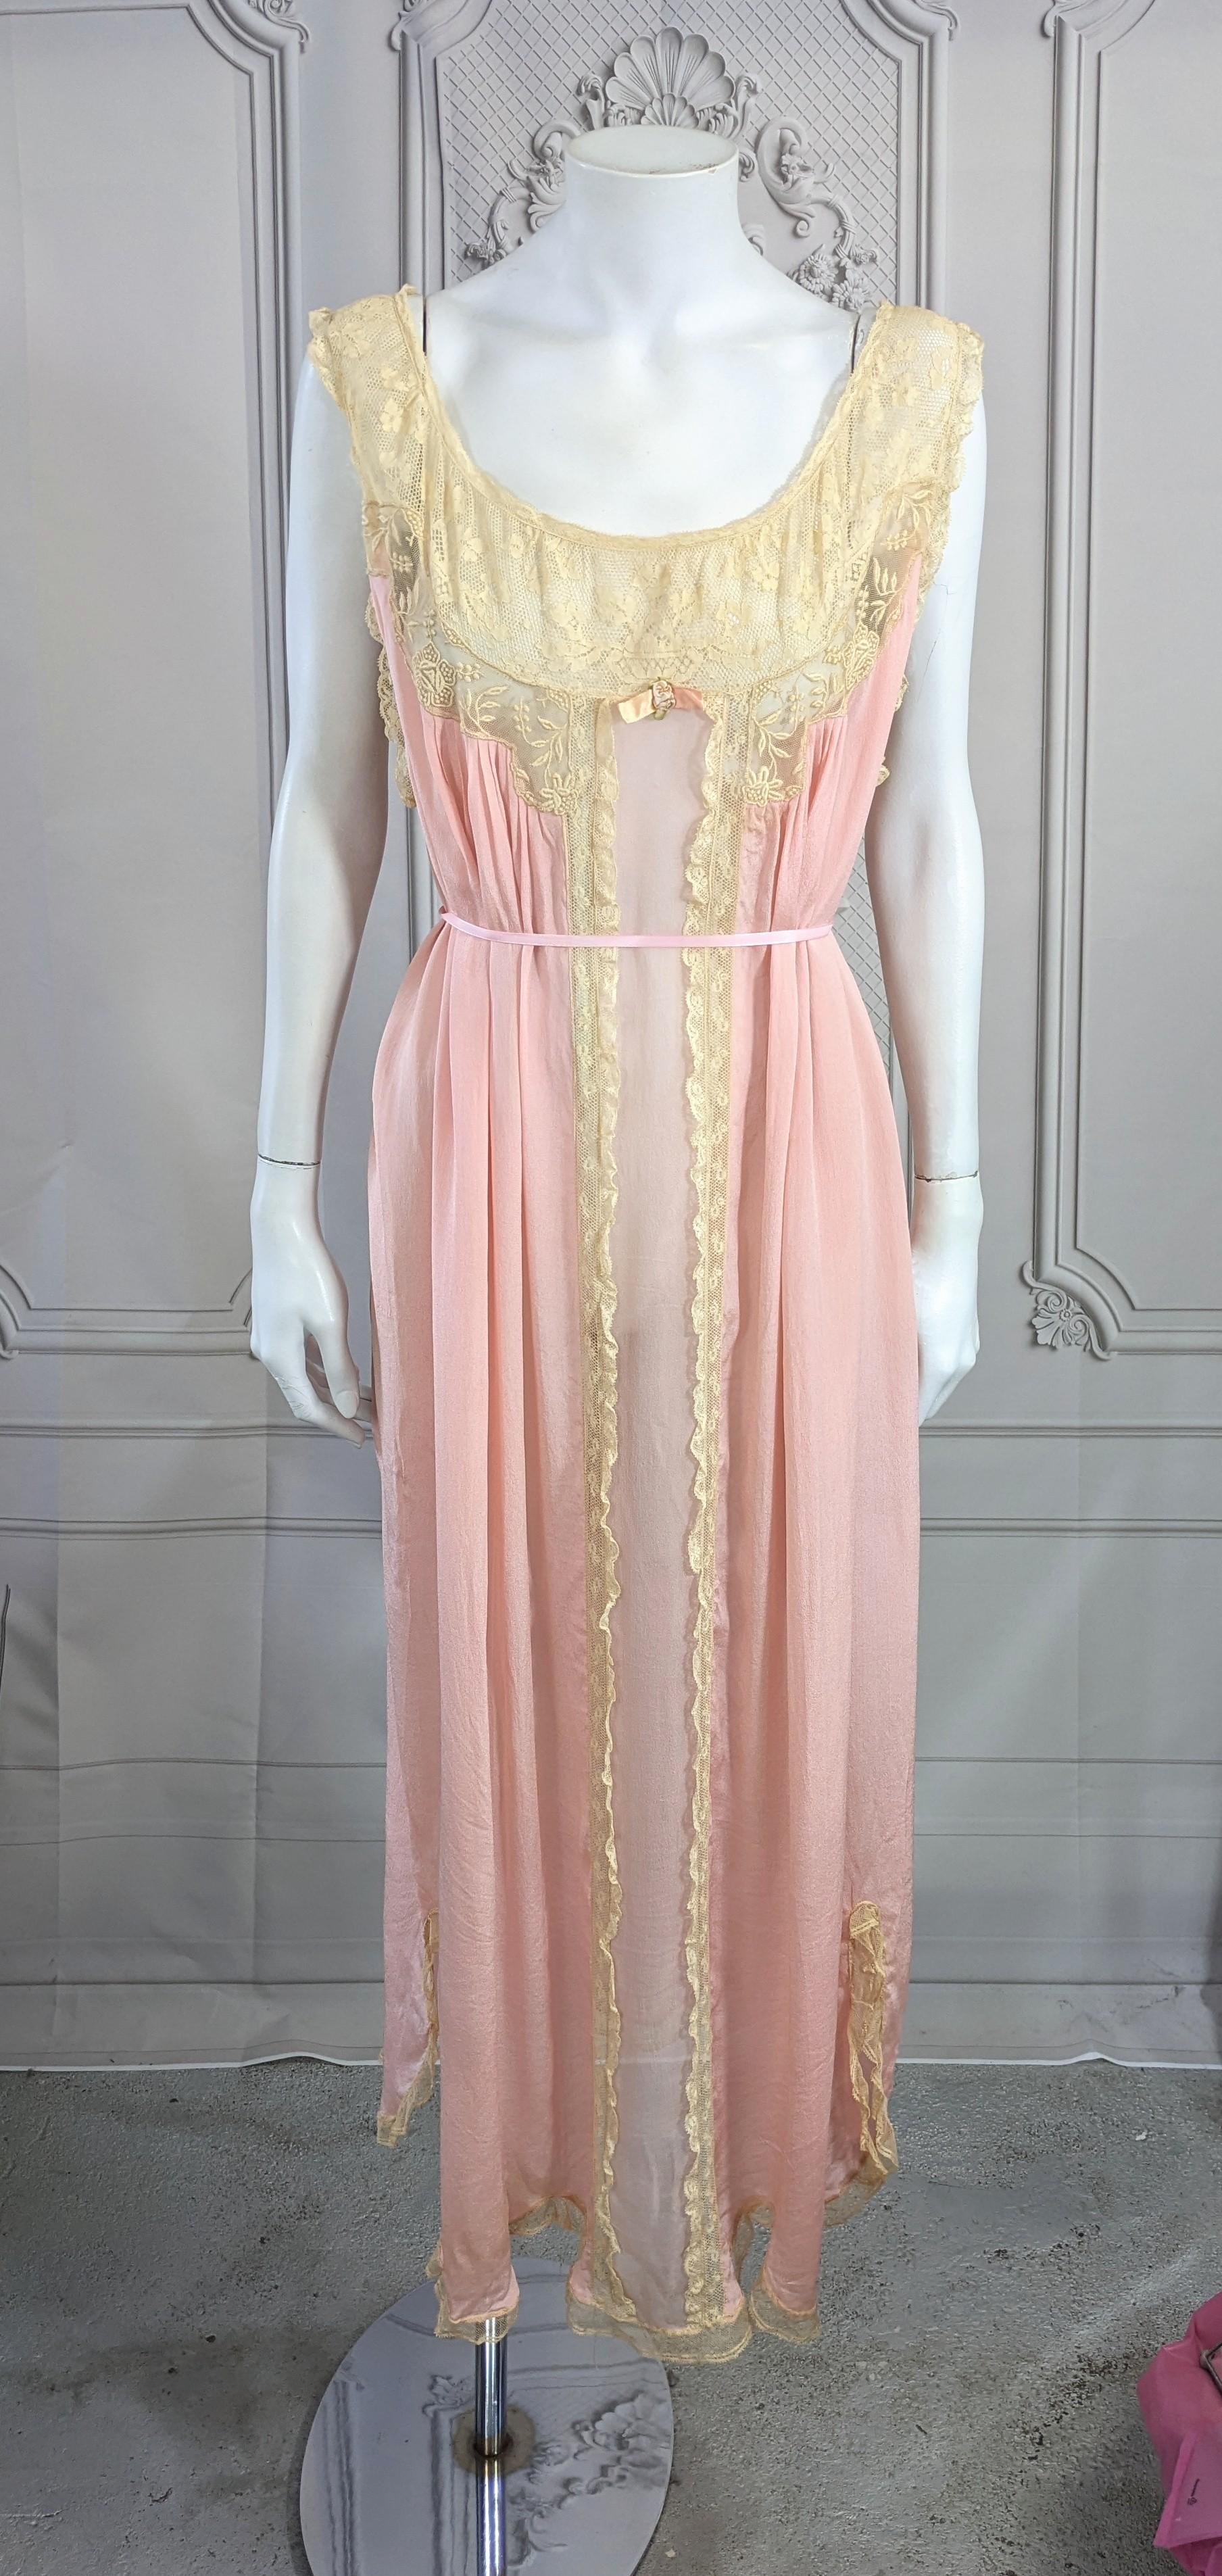 Lovely Silk Crepe, Chiffon and Lace Gown, retailed by I. Magnin in the 1920's. Antique lace inserts on pink silk crepe body with sheer chiffon front panel and ruffled lace trim. Full cut tubular shape. Large size. 1920's French import. 